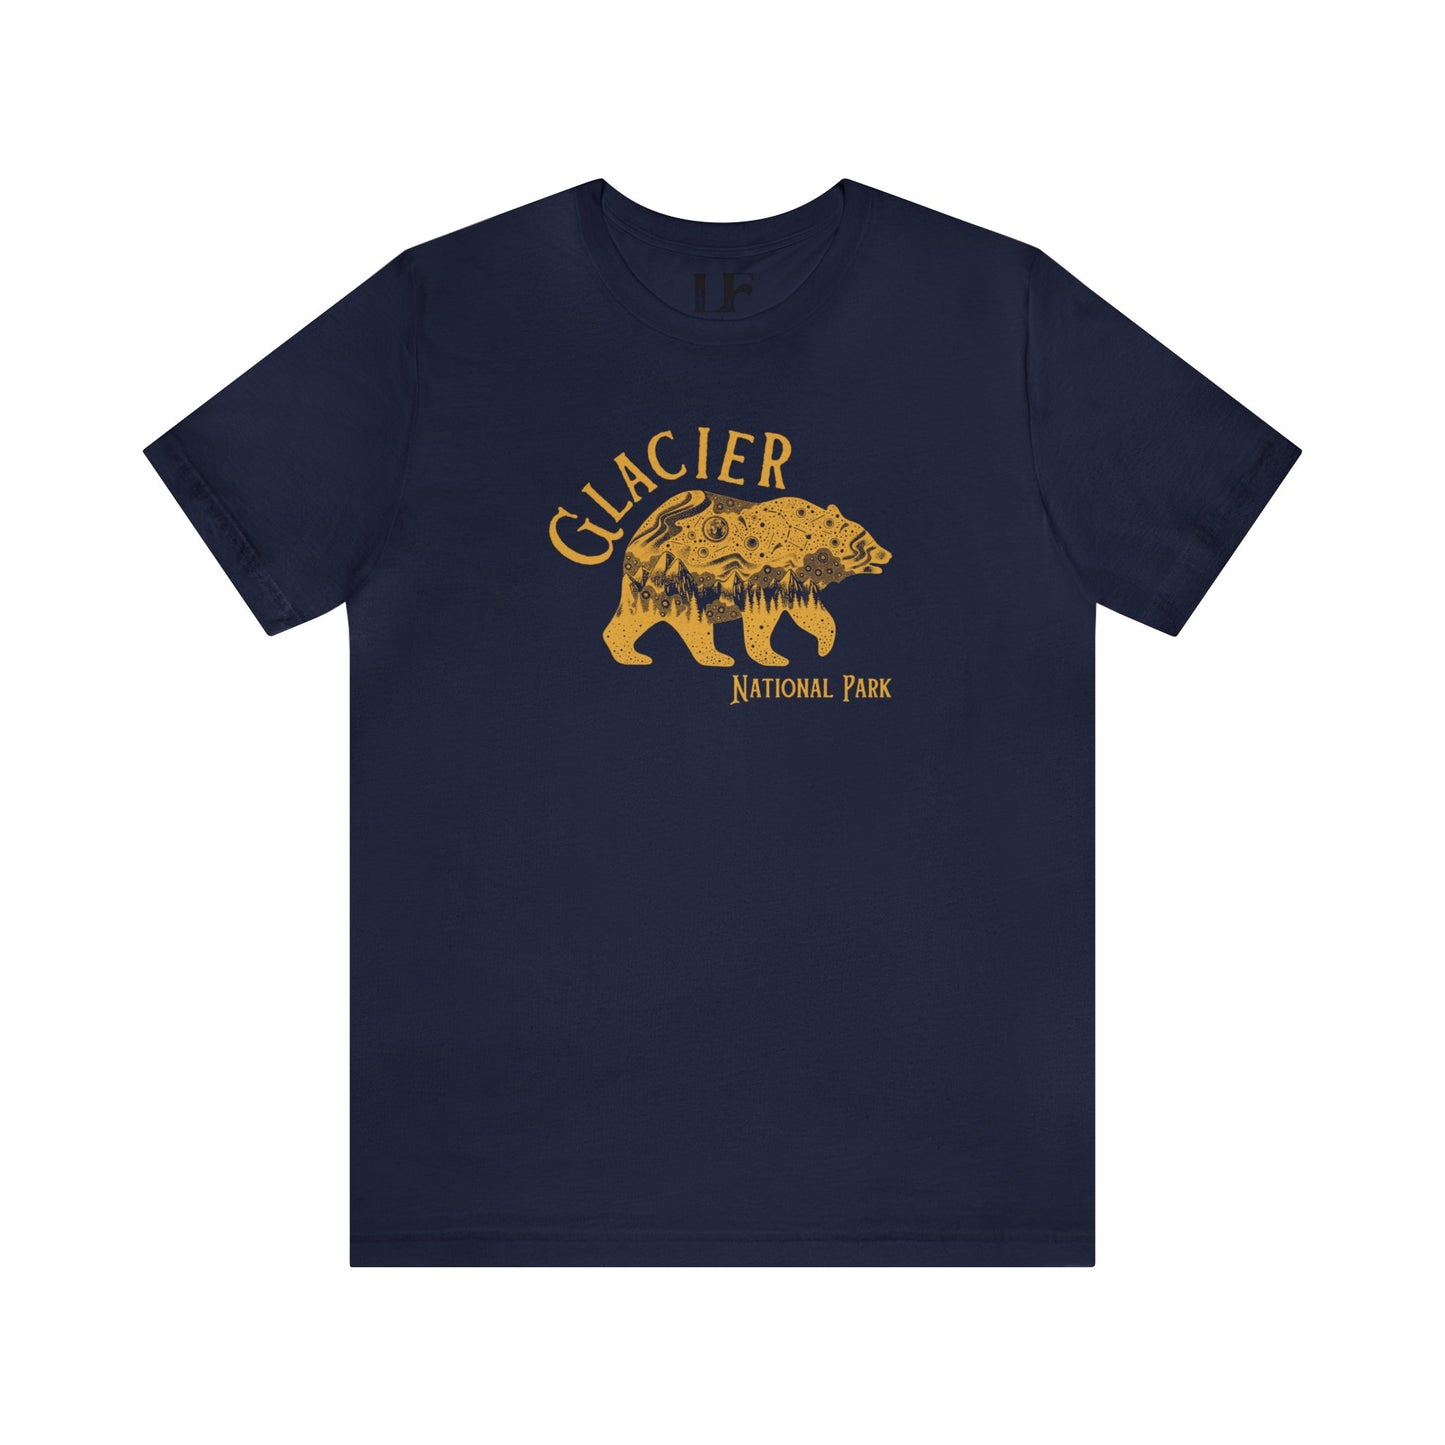 Glacier Galaxy Bear National Park ShirtBring the magic and beauty of Glacier National Park at night into your t-shirt rotation with this galaxy grizzly bear tee inspired by the midnight magic of the park 